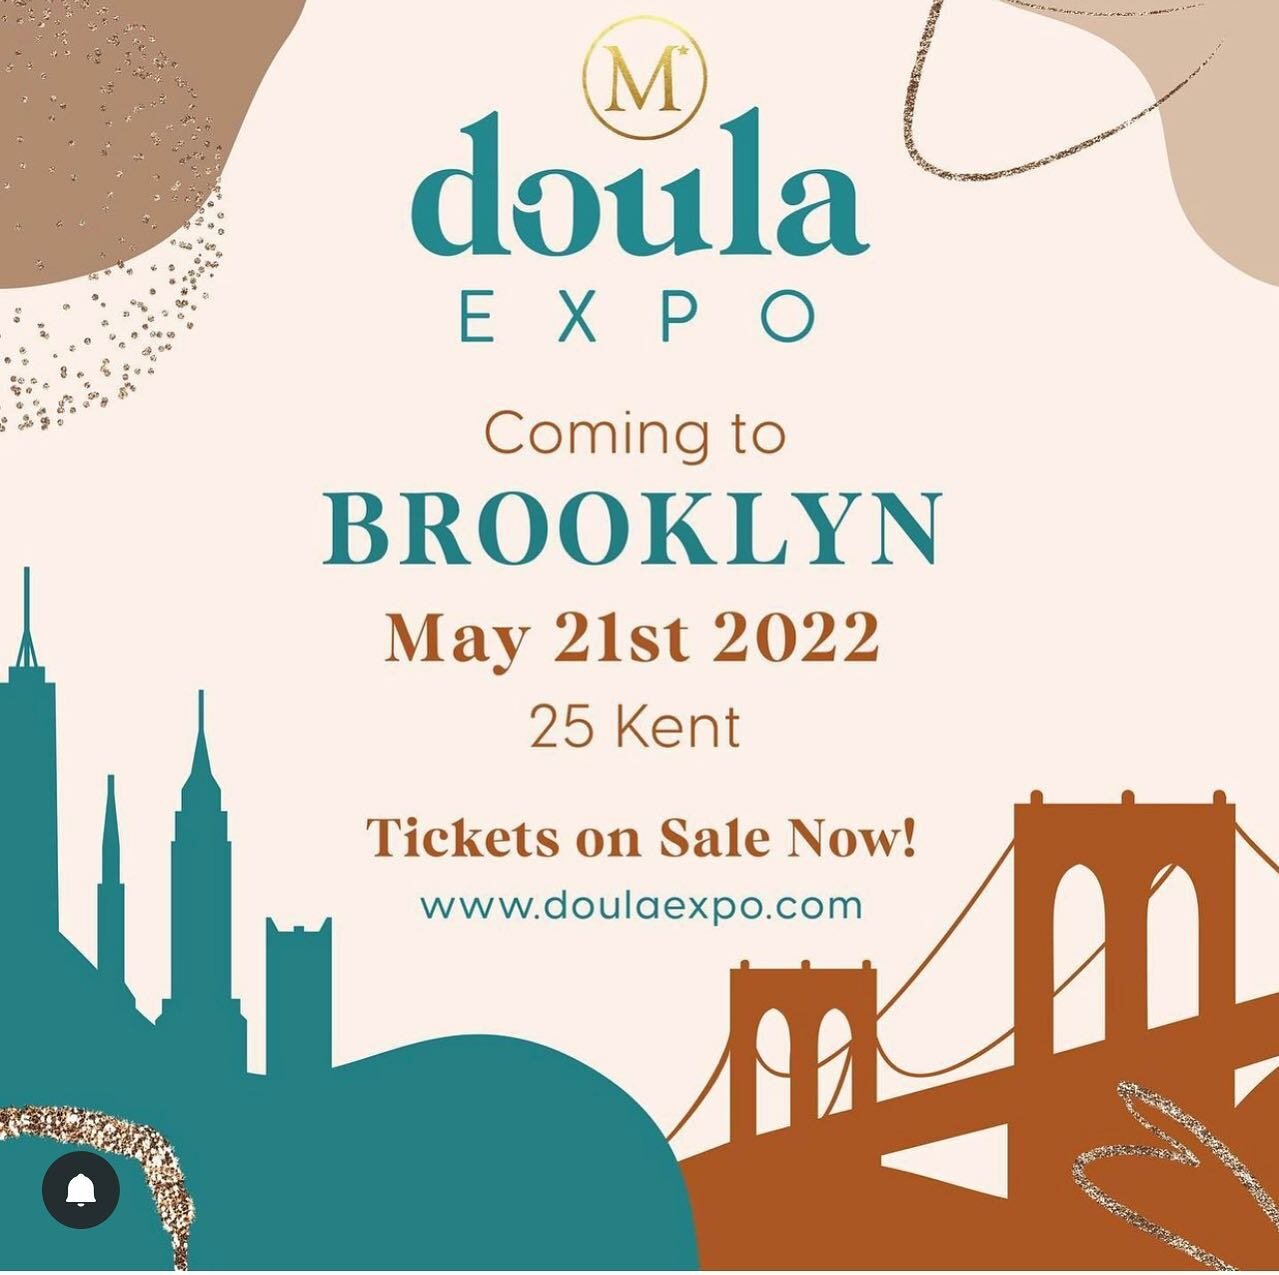 I&rsquo;m thrilled to be in community with my sibs on this weekend in NY at the @mamaglow Doula Expo. Come find me. &lsquo;Cause I&rsquo;m collecting all the hugs. 
👶🏾
Karen Walrond says Lightmakers will do good to bring joy to &ldquo;the work&rdqu